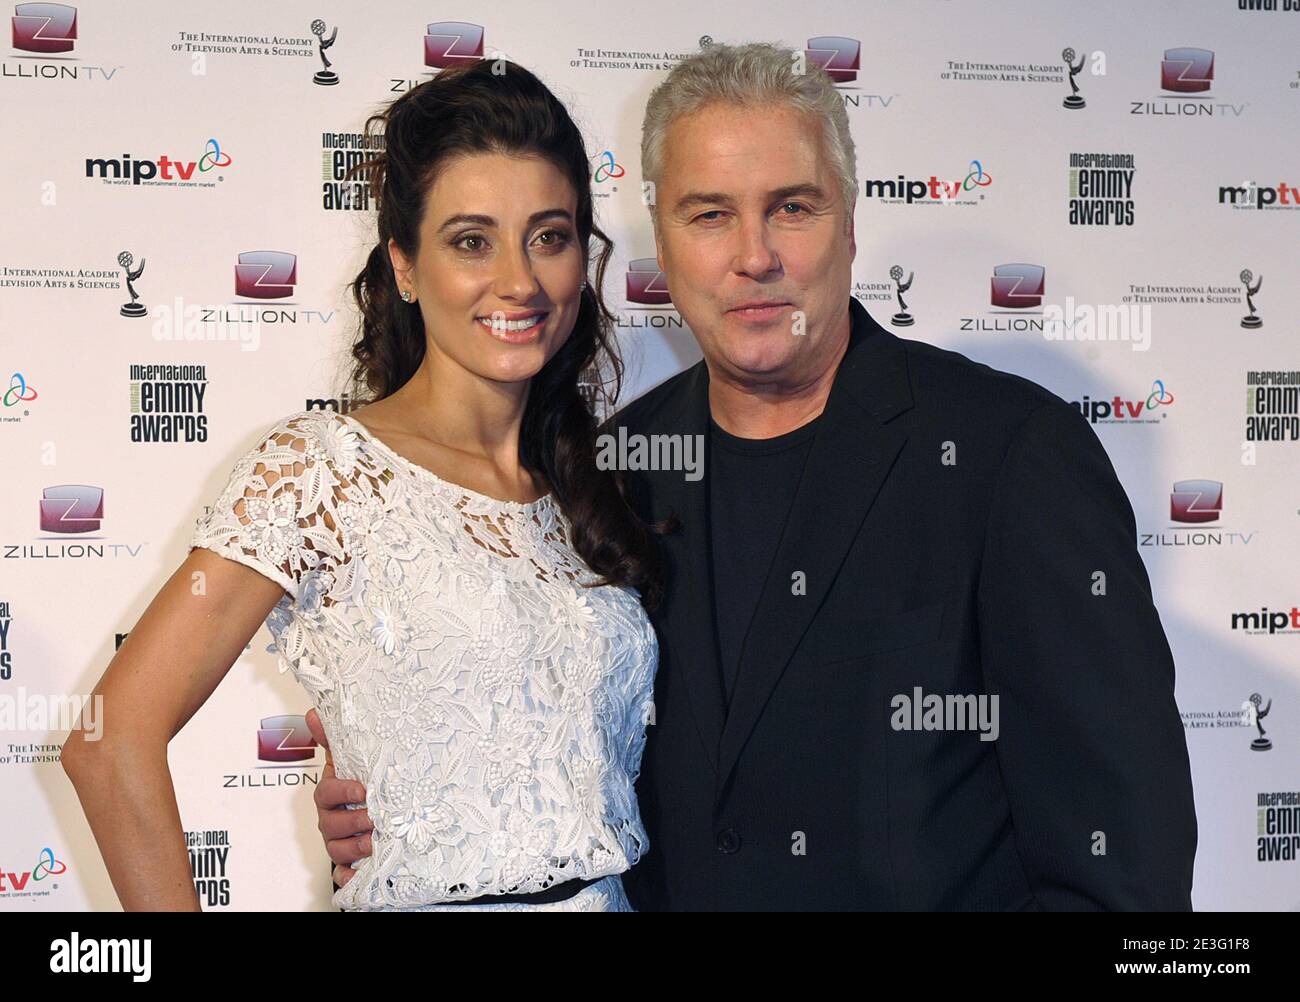 'CSI: Crime Scene Investigation' star William Petersen poses with wife Gina upon arrival for the International Digital Emmy Awards during the 46th MIPTV/MILIA in Cannes, France on March 30, 2009. Photo by Giancarlo Gorassini/ABACAPRESS.COM Stock Photo